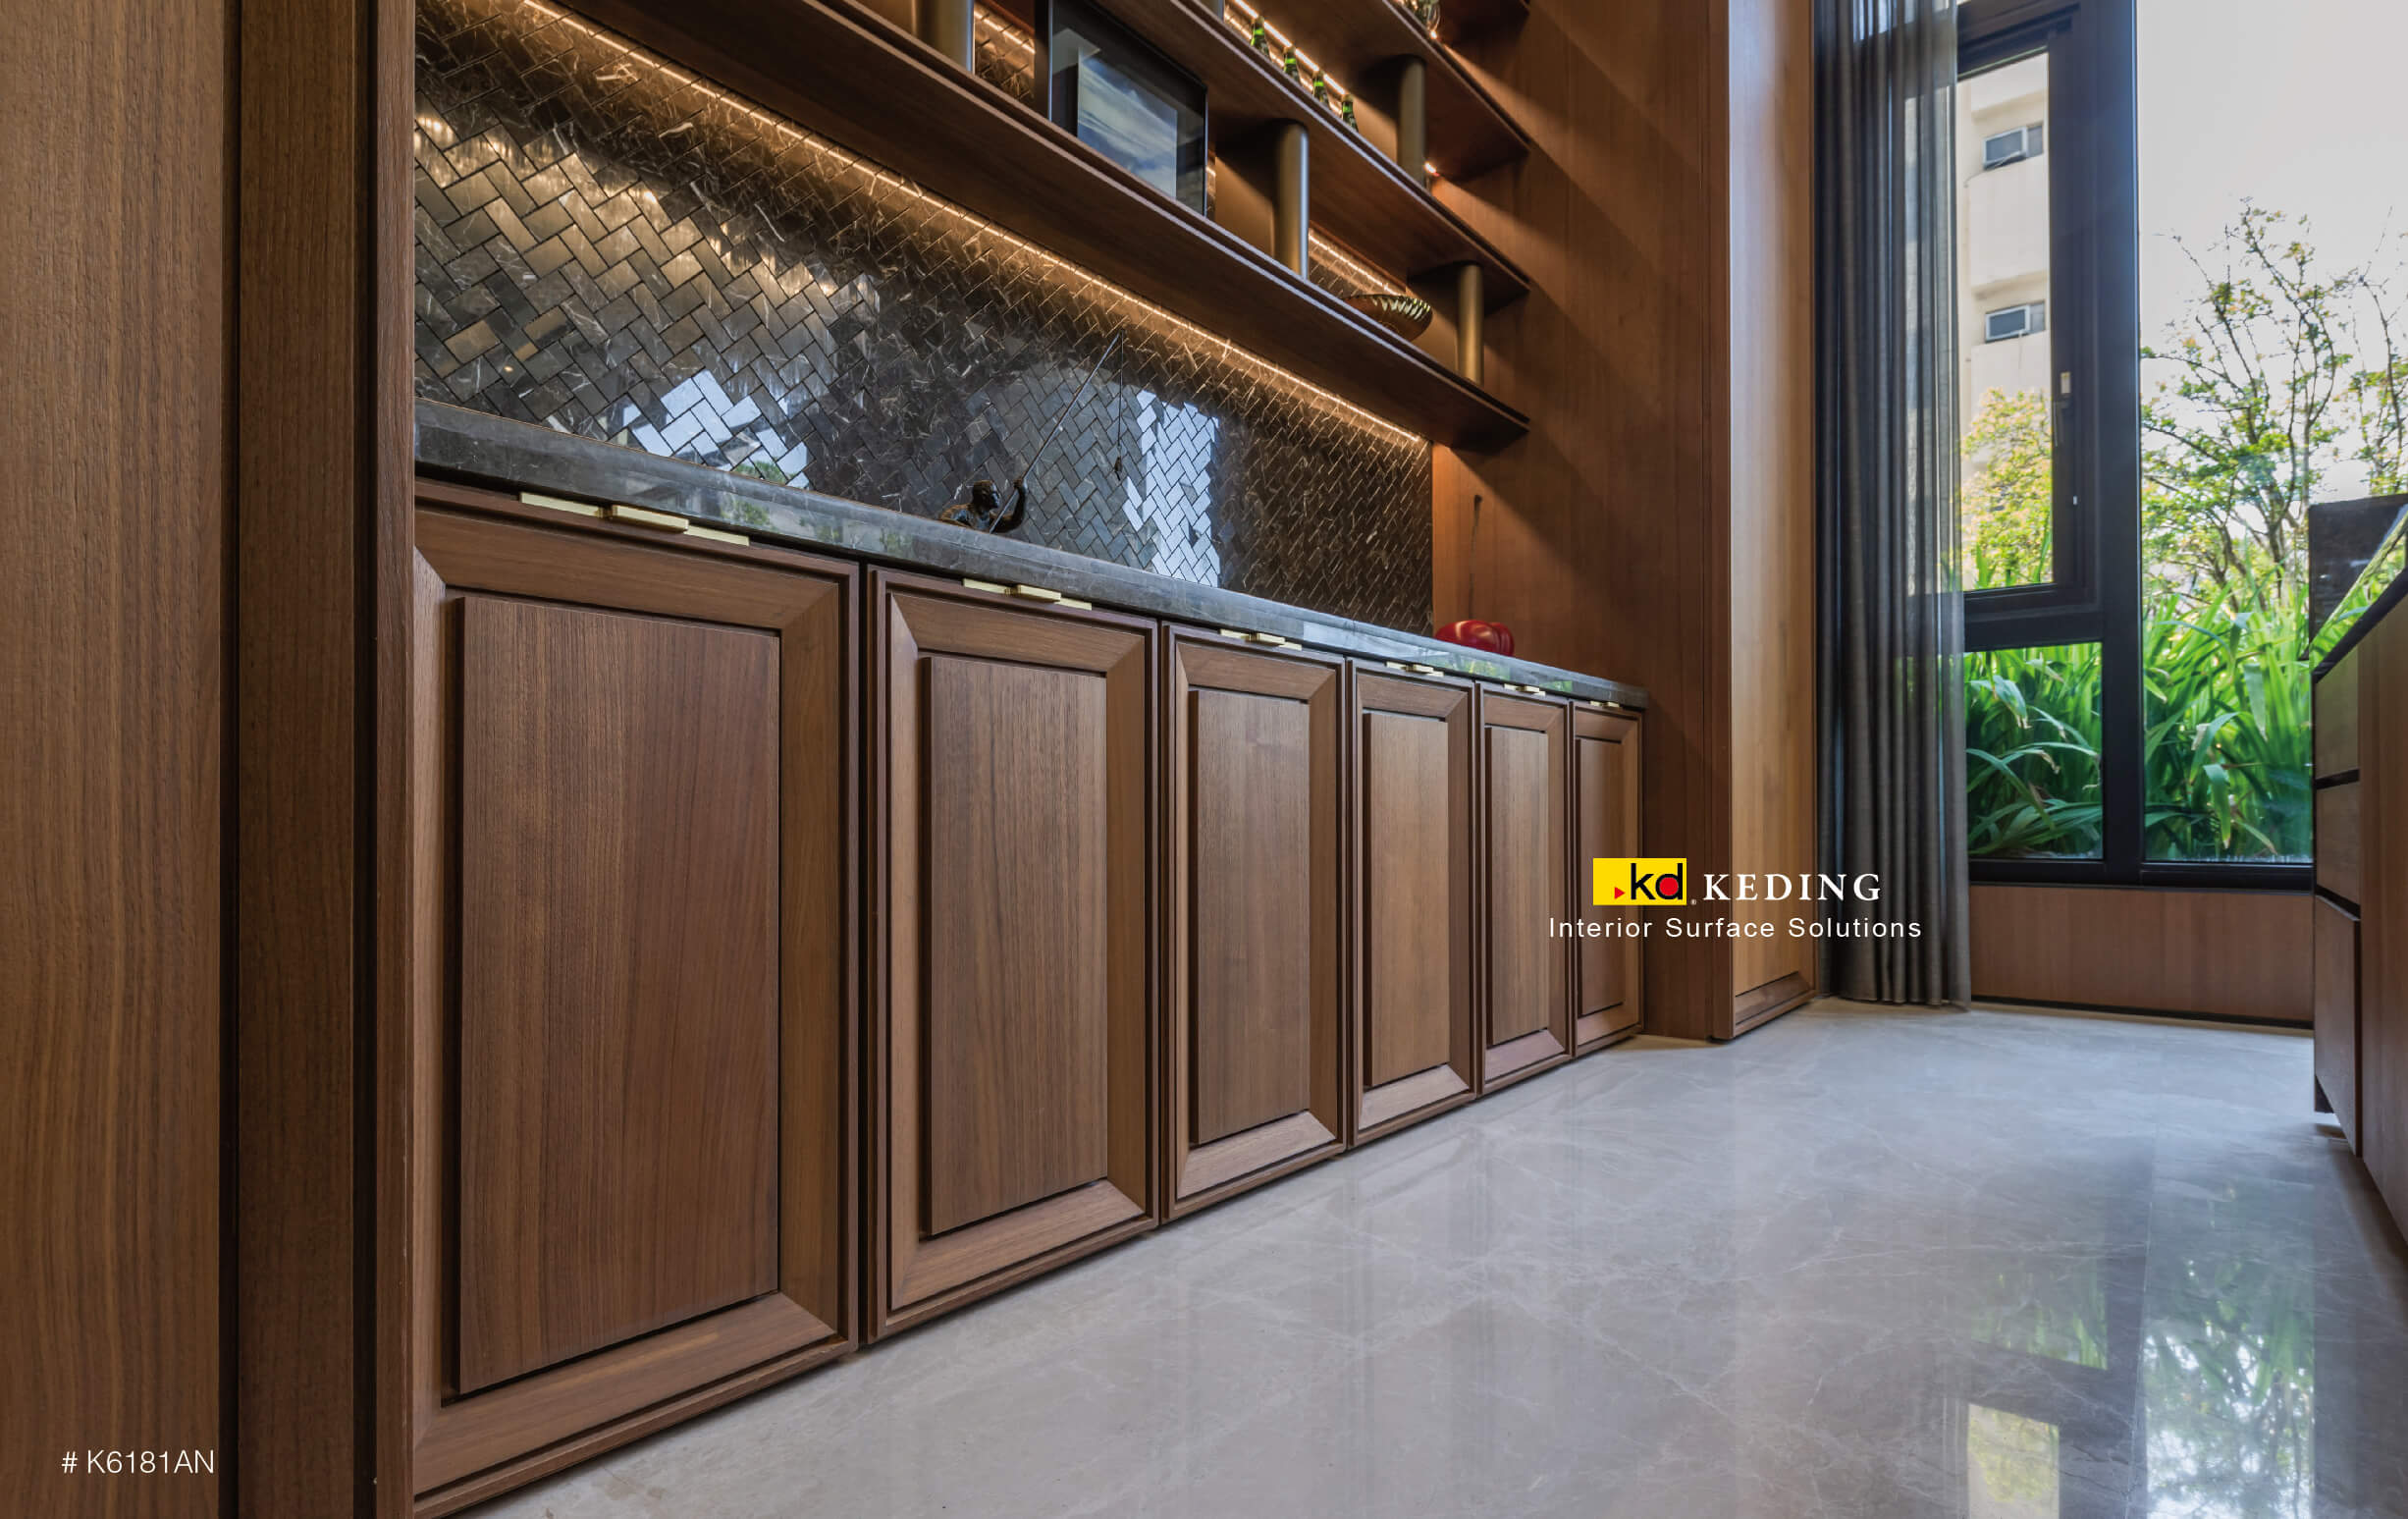 A sophisticated room featuring cabinets adorned with Walnut and Limba wood grain laminates from the Wood Grain Collection